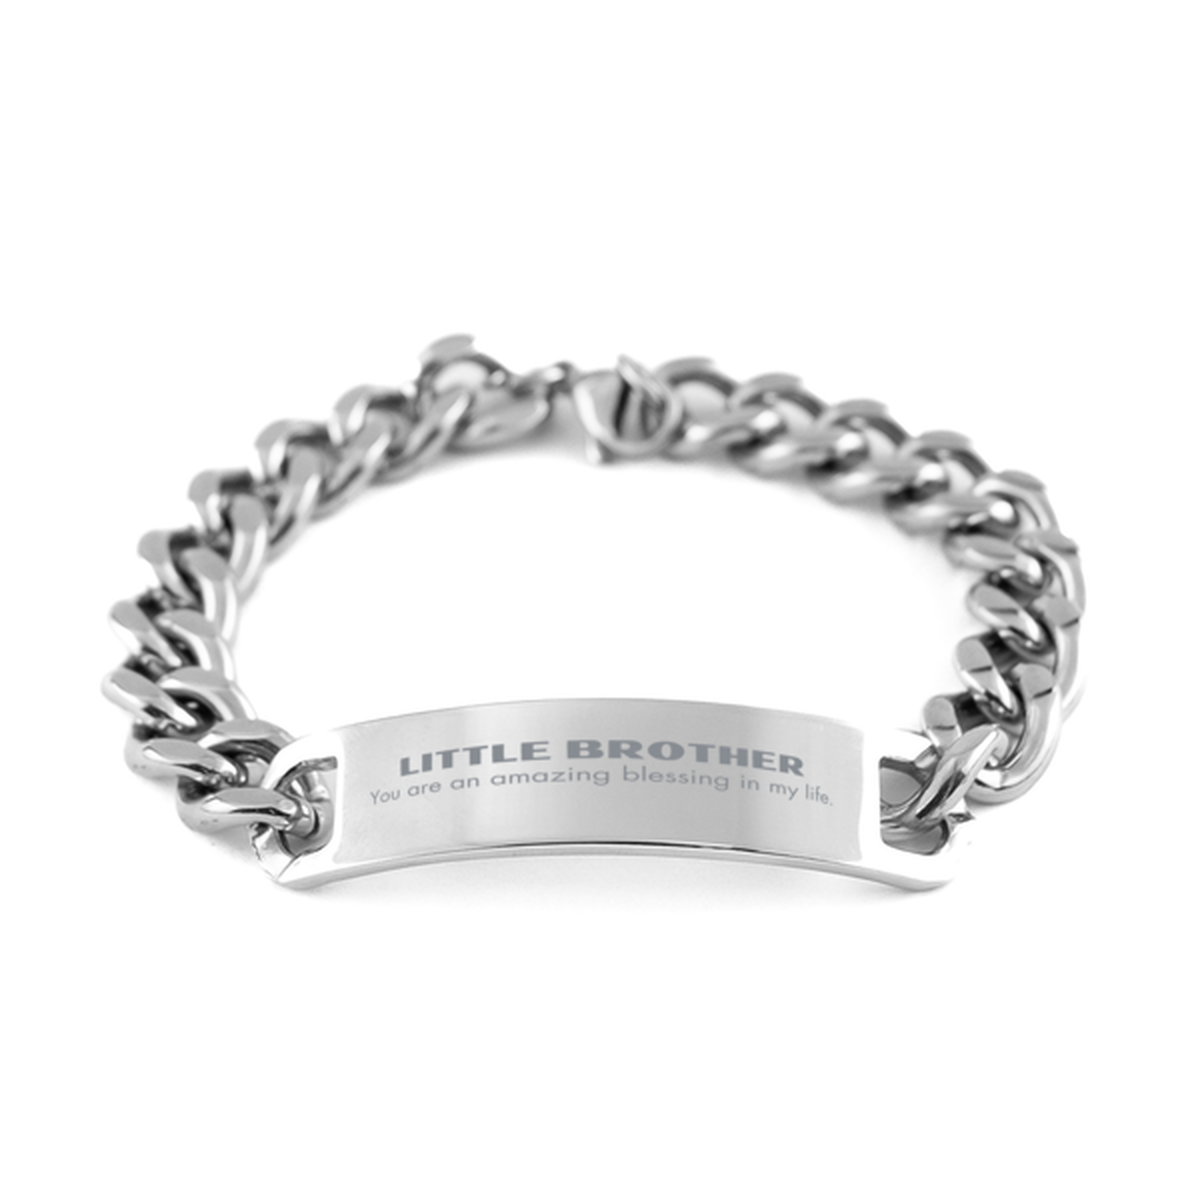 Little Brother Cuban Chain Stainless Steel Bracelet, You are an amazing blessing in my life, Thank You Gifts For Little Brother, Inspirational Birthday Christmas Unique Gifts For Little Brother